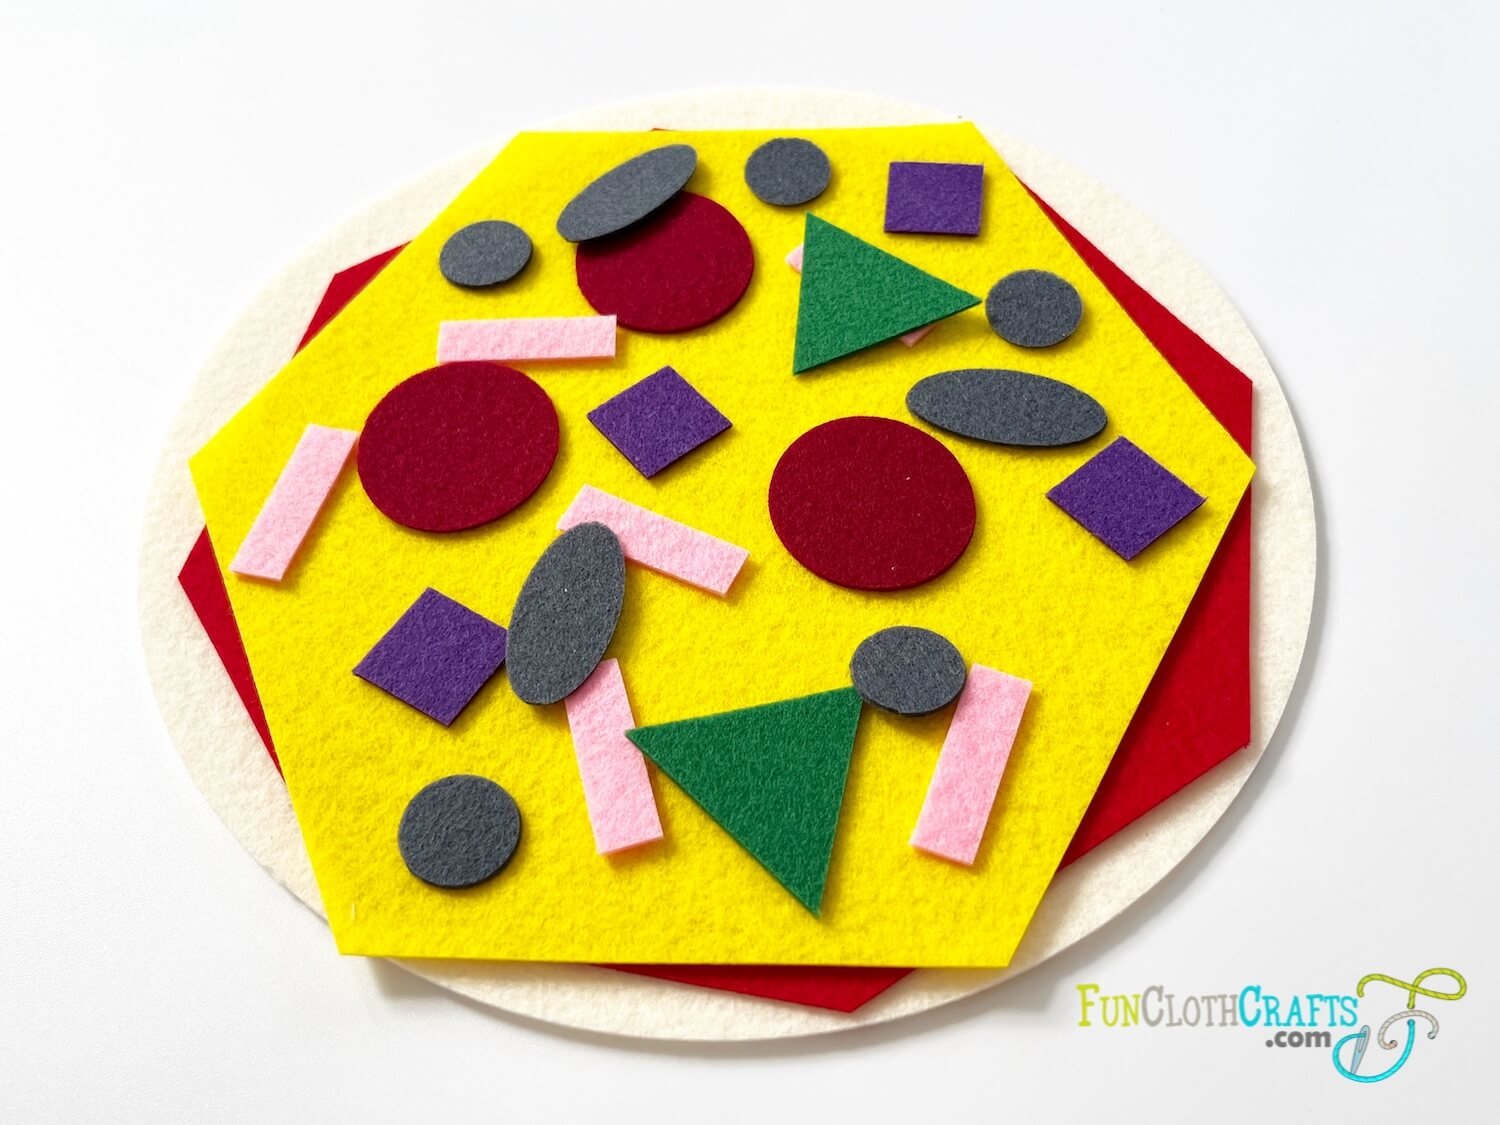 Felt Play Shapes - Things to Make and Do, Crafts and Activities